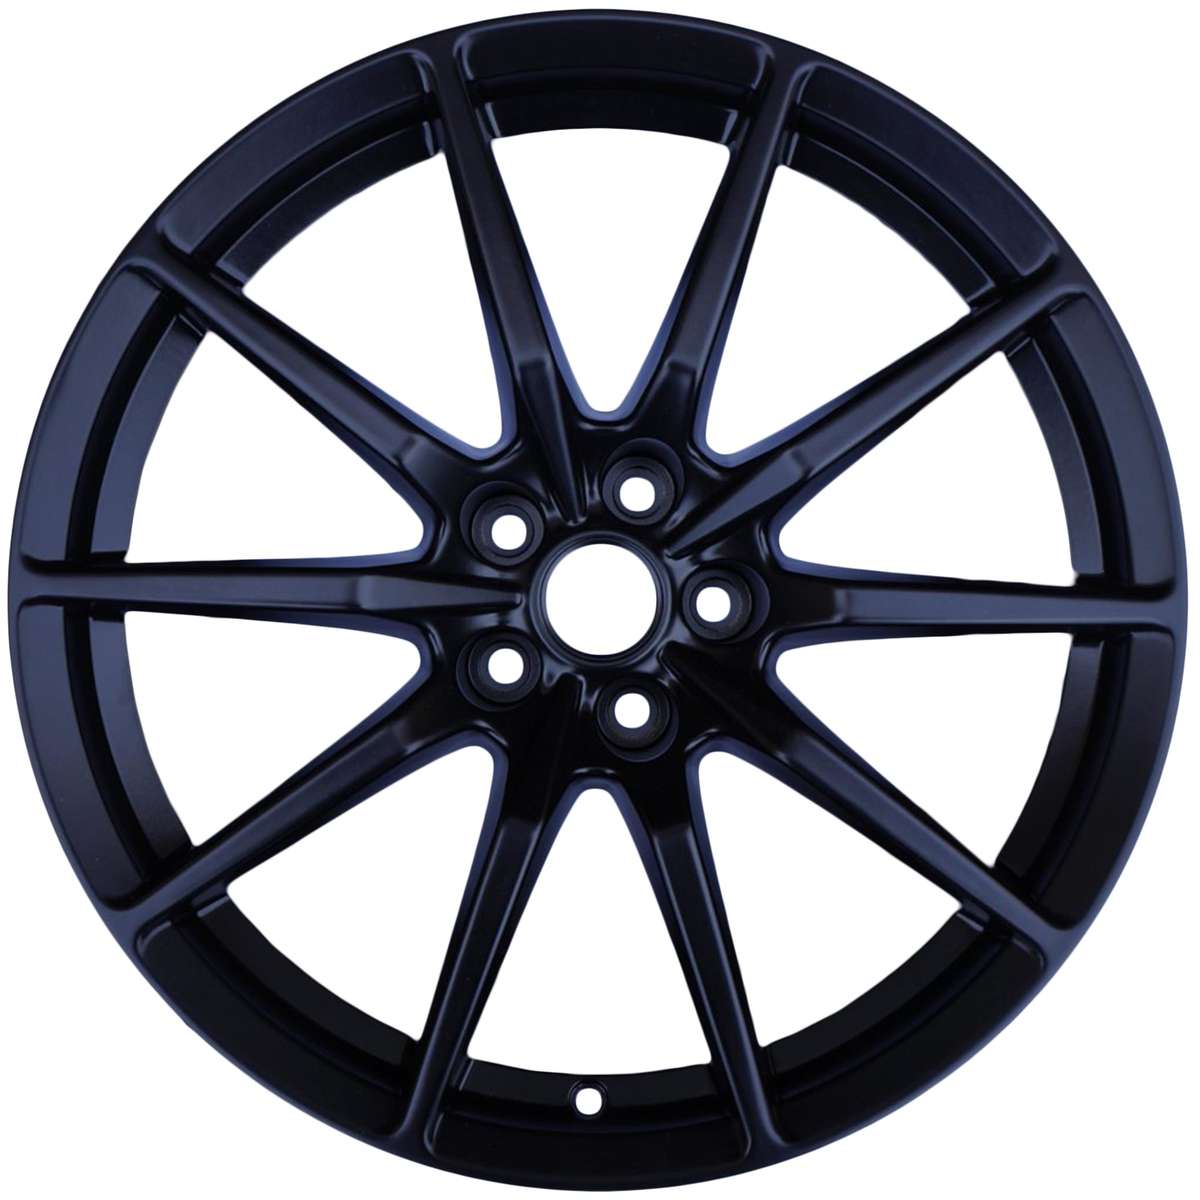 2018 Ford Mustang New 19" Replacement Wheel Rim RW10054B